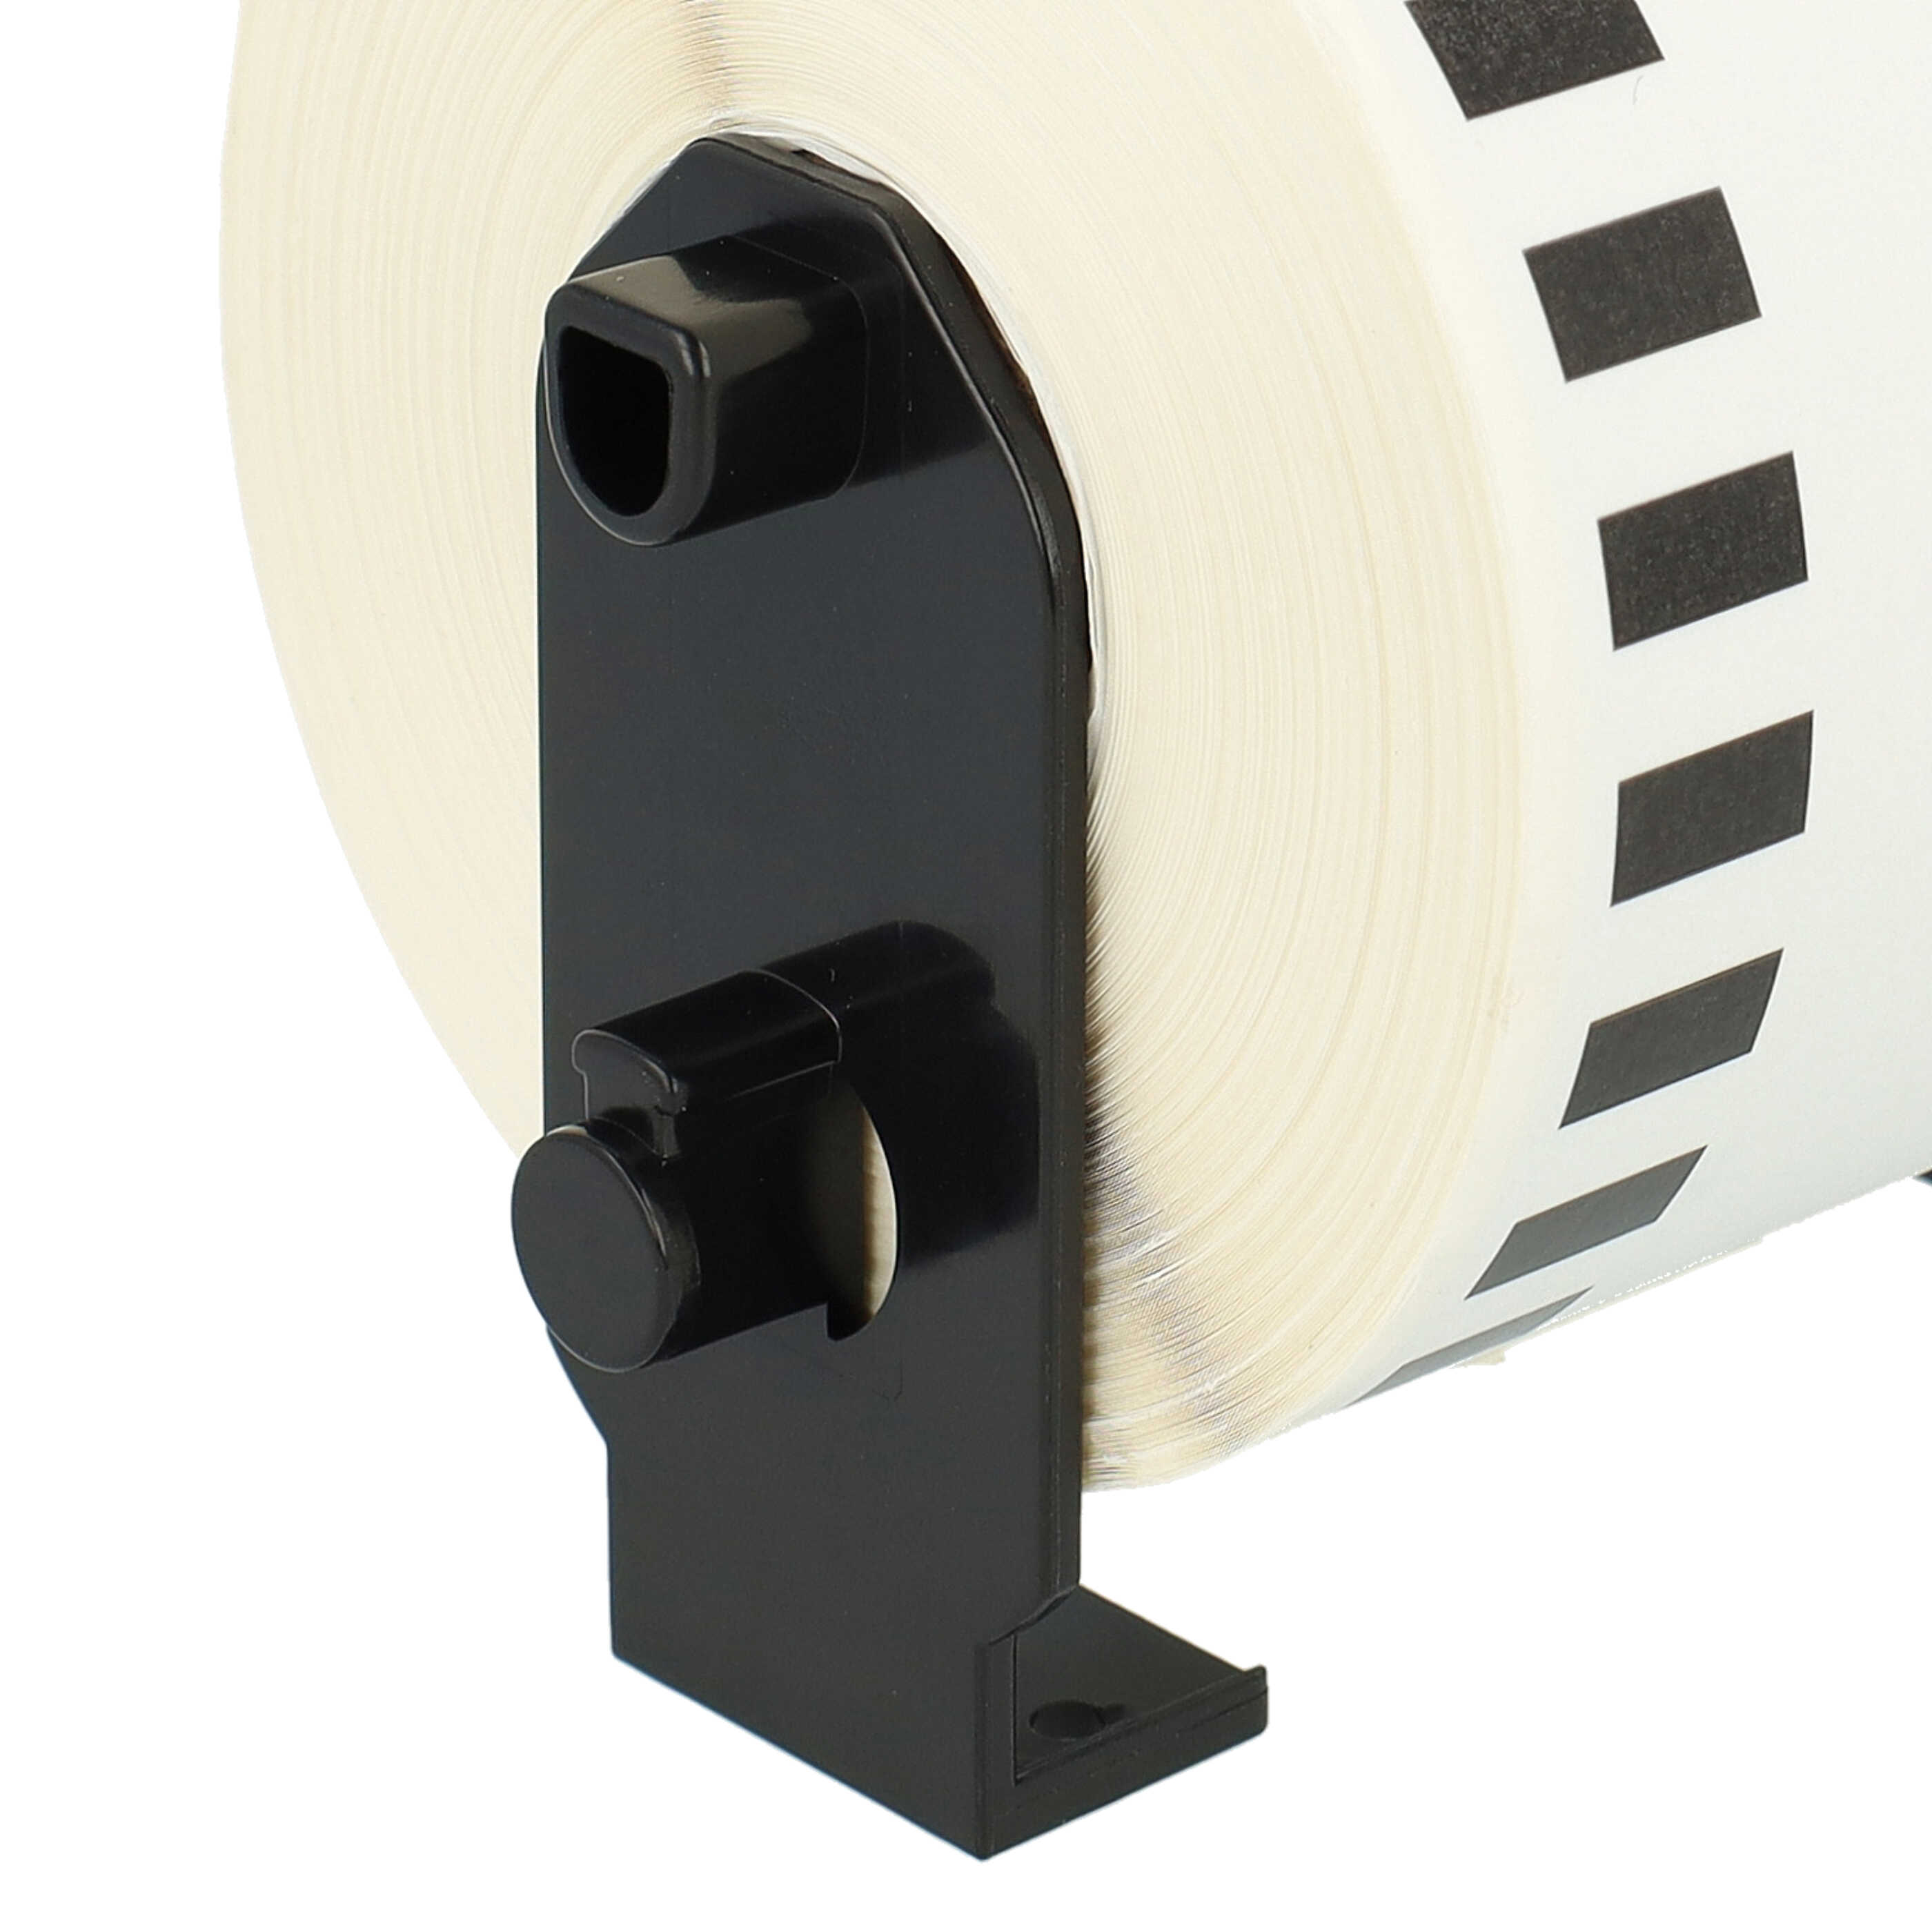 Labels replaces Brother DK-22205 for Labeller - 62 mm x 30.48m + Holder